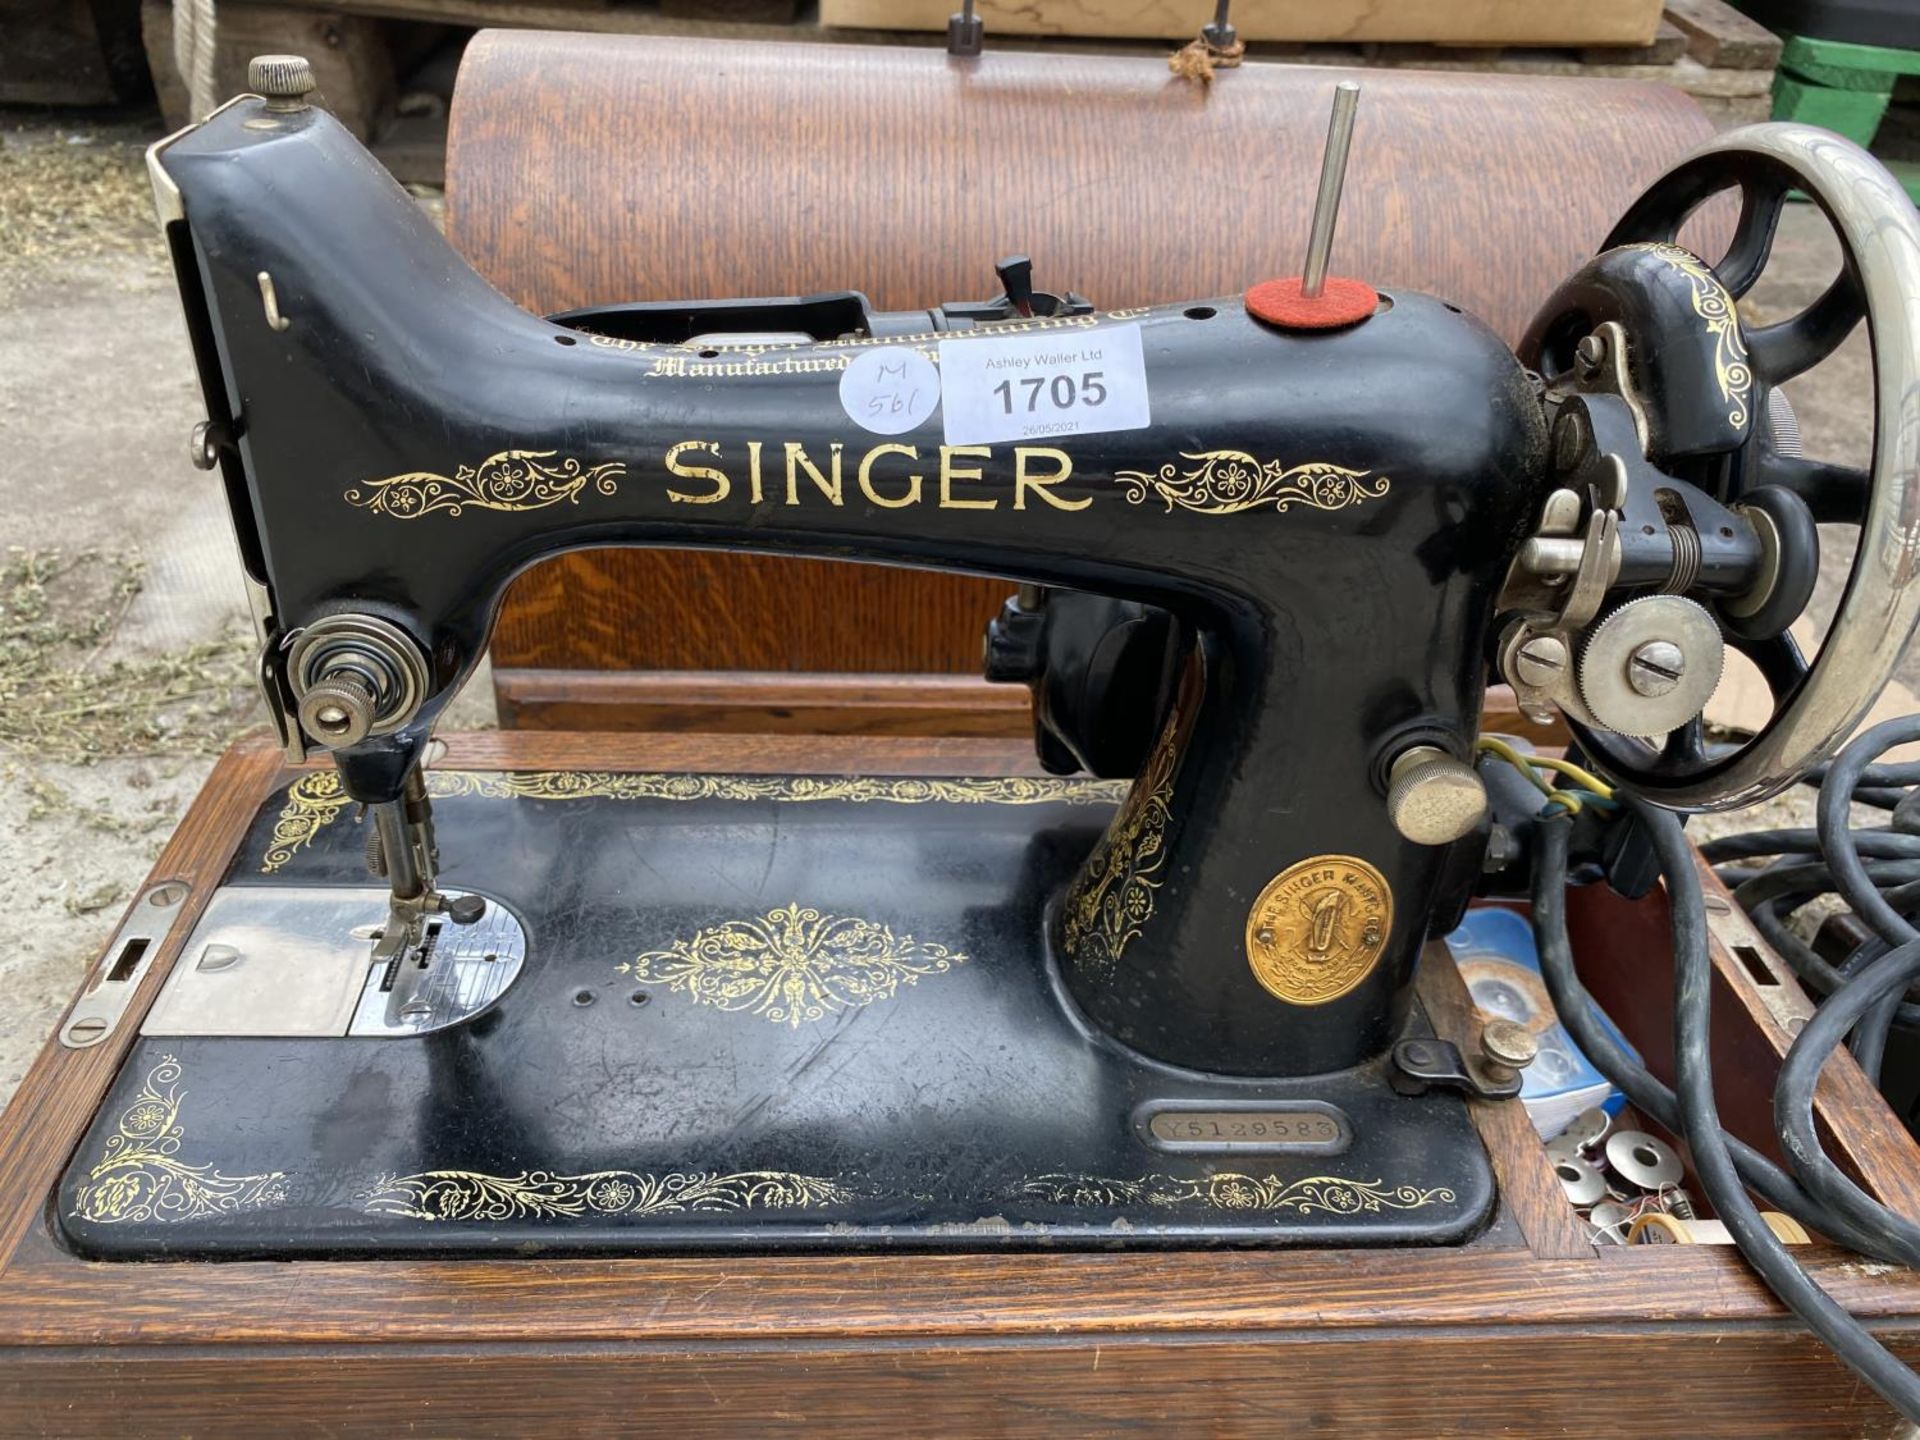 A VINTAGE SINGER ELECTRIC SEWING MACHINE - Image 2 of 4